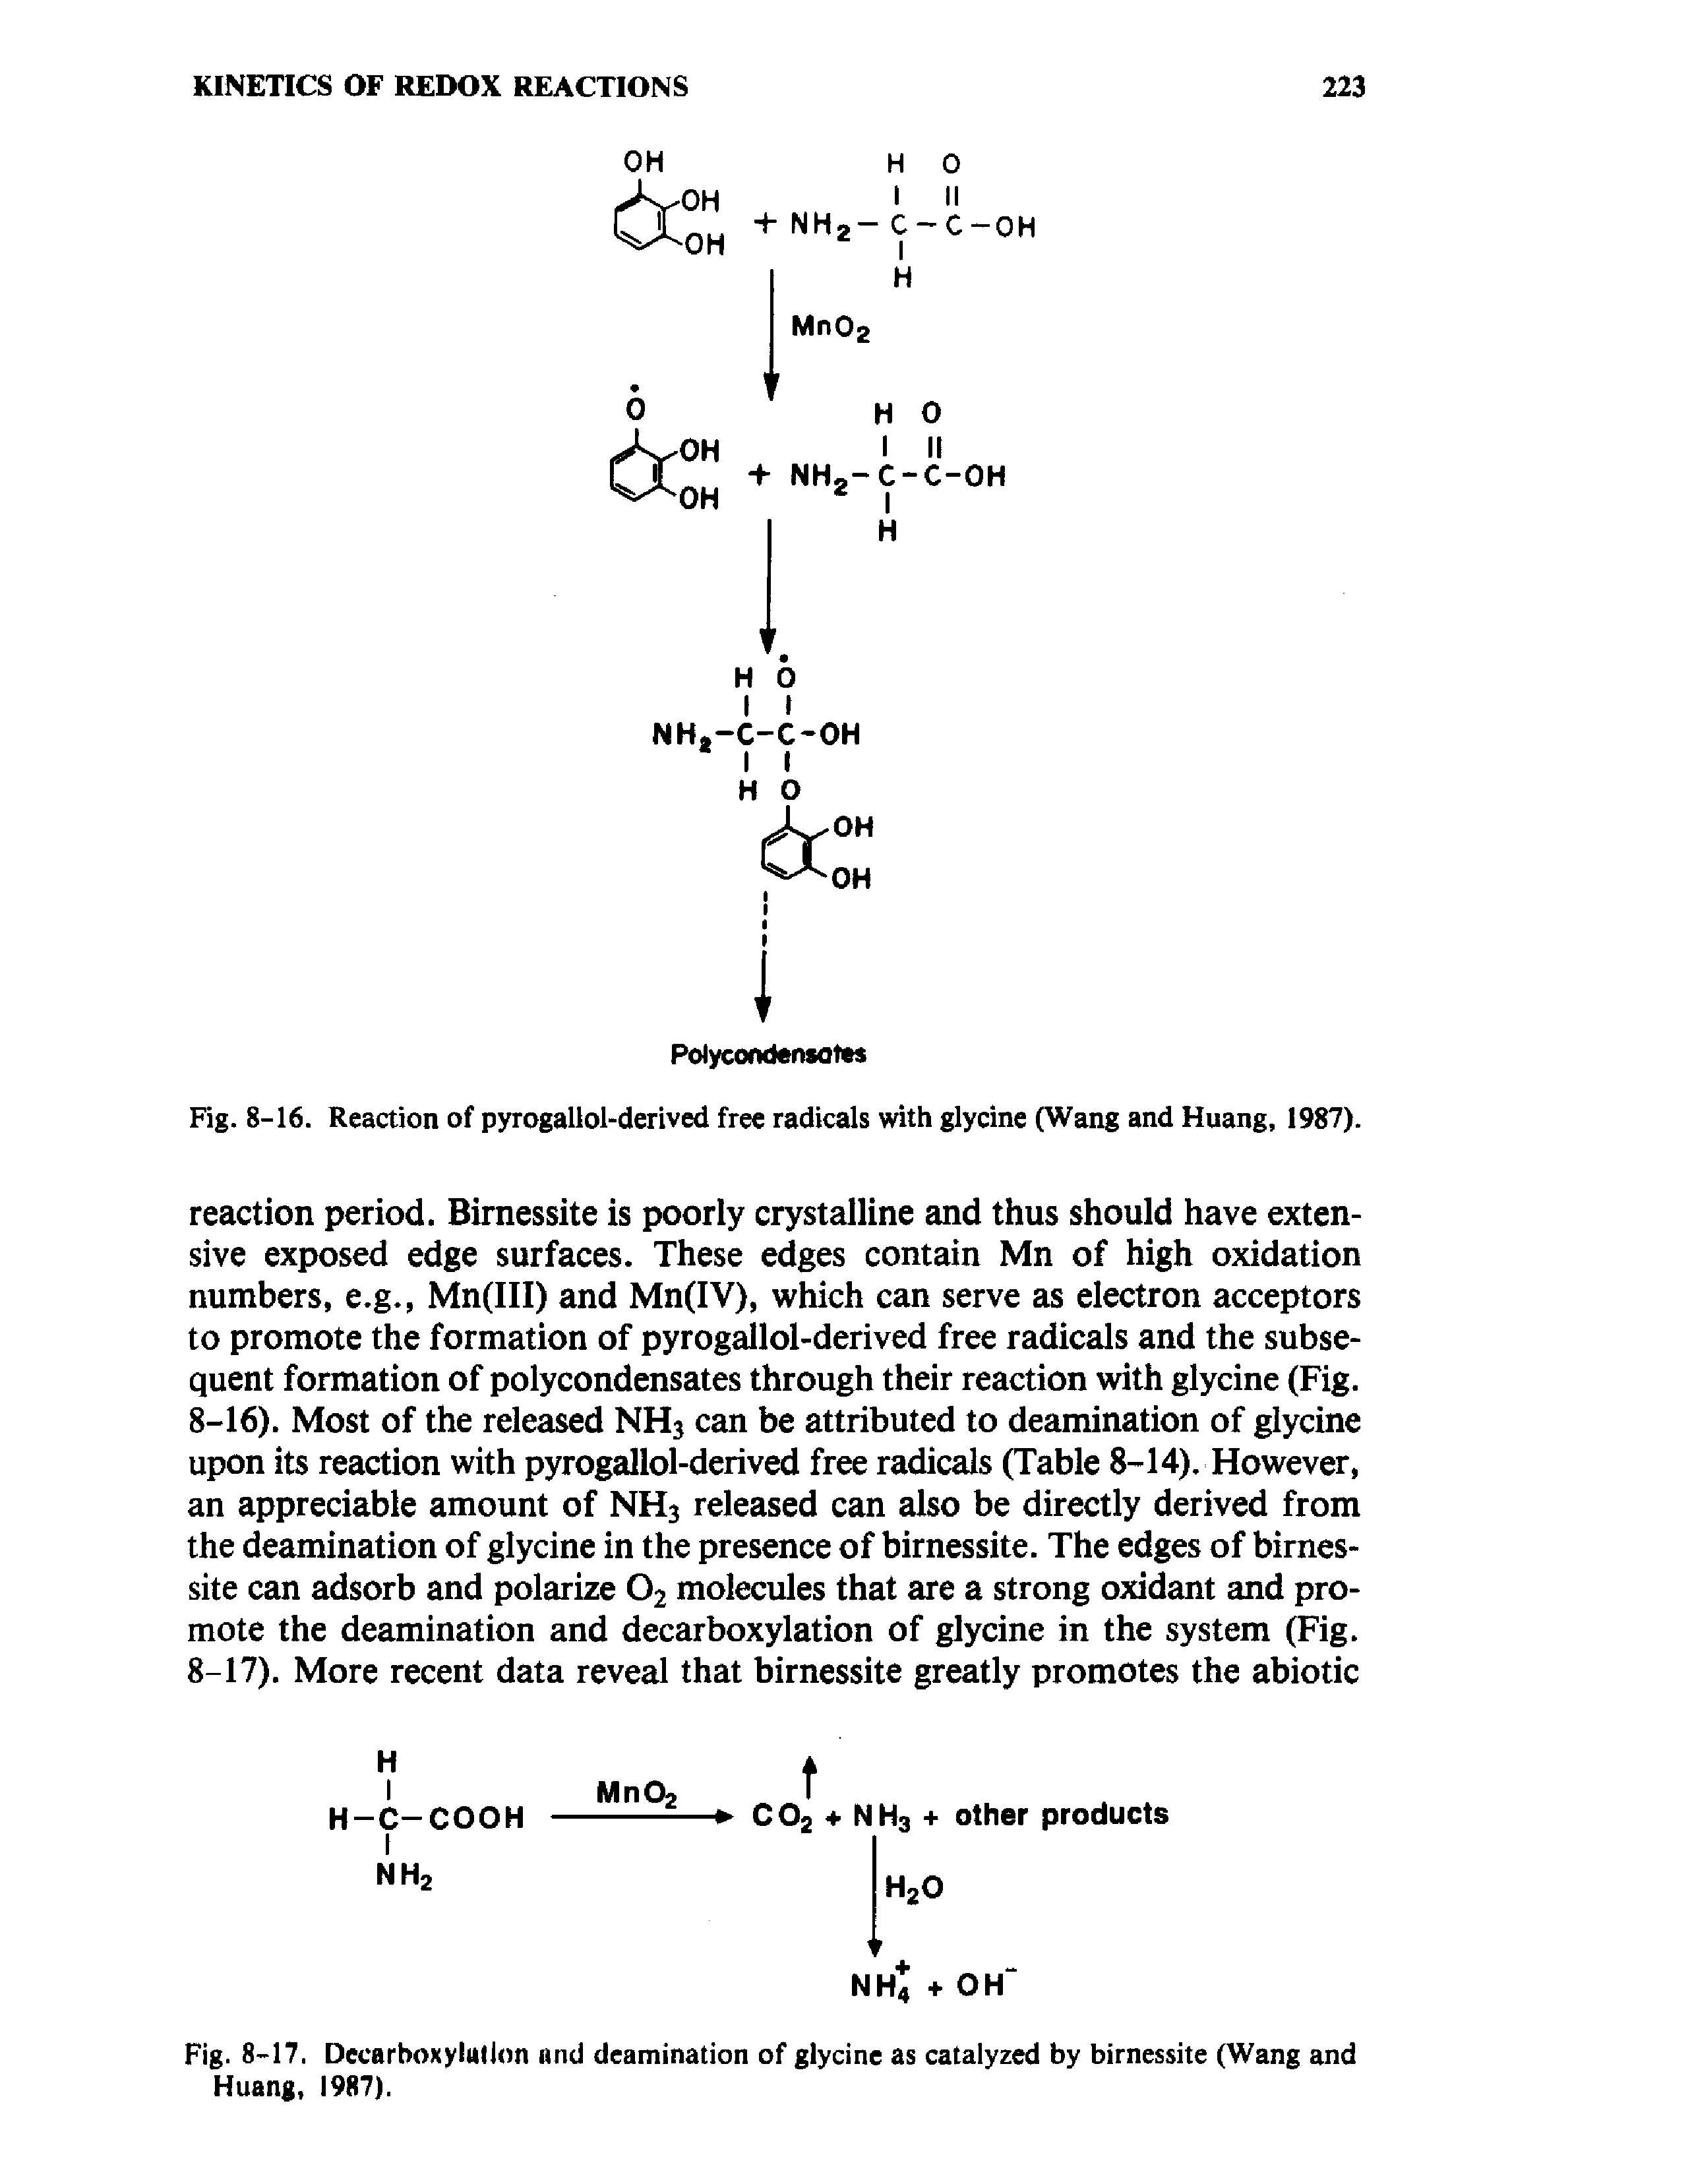 Fig. 8-16. Reaction of pyrogallol-derived free radicals with glycine (Wang and Huang, 1987).